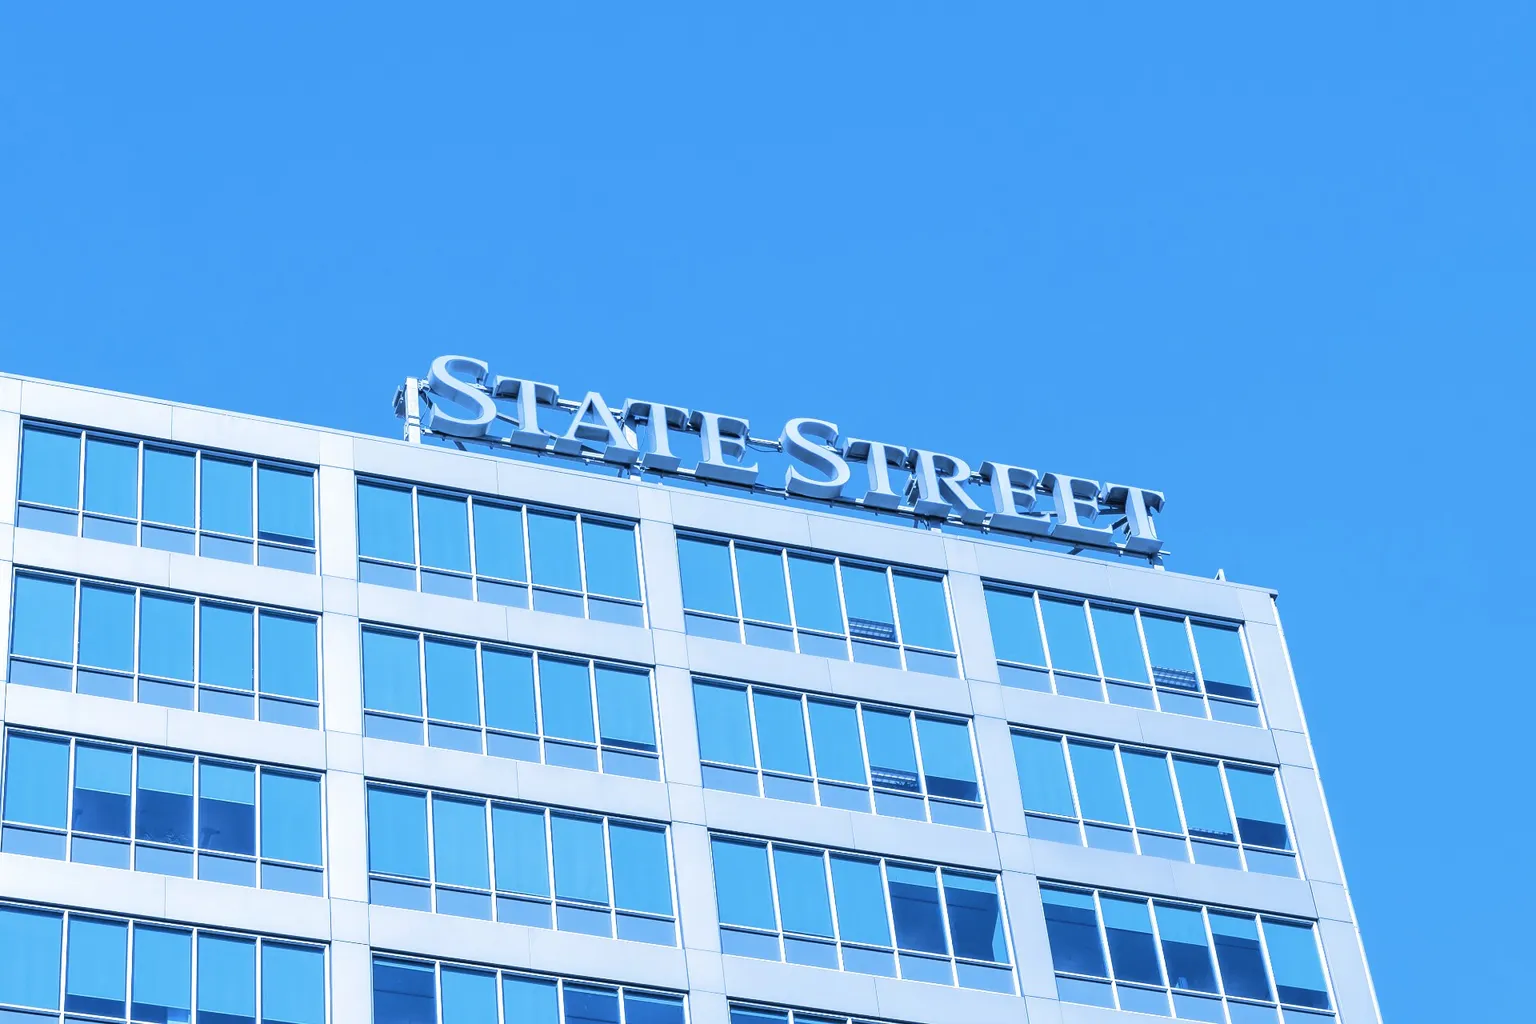 State Street is exploring the crypto space. Image: Shutterstock.